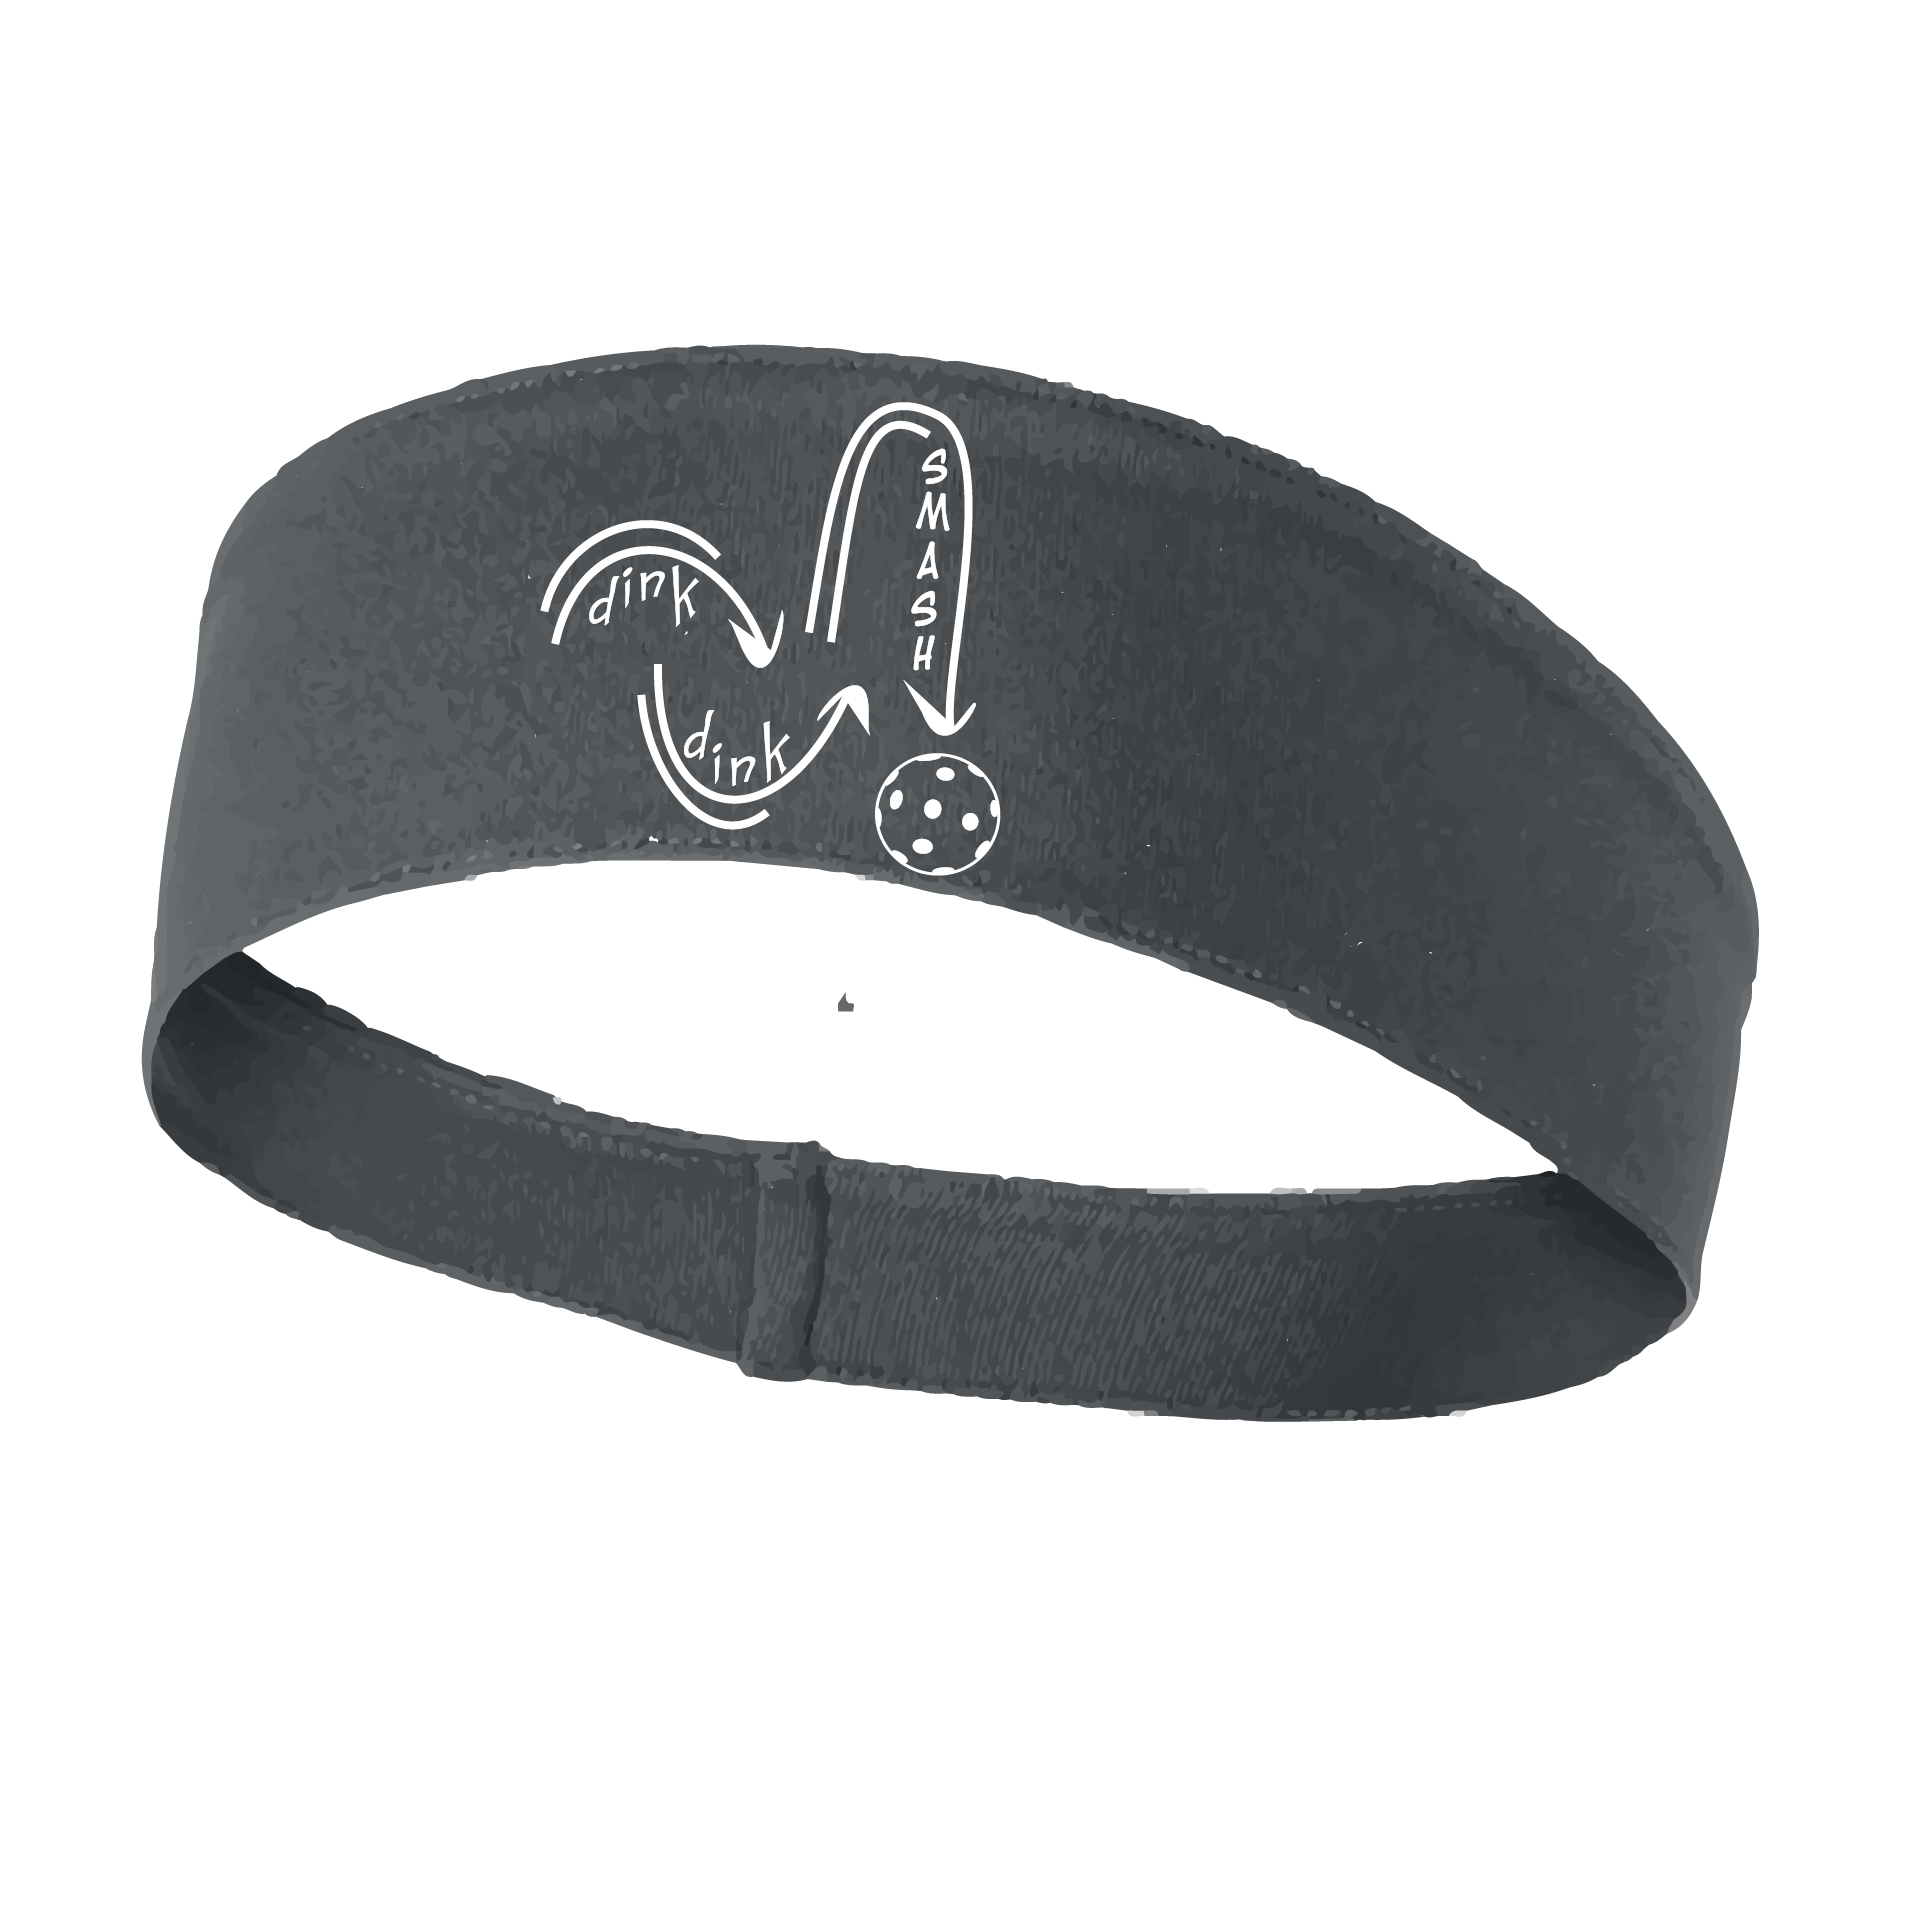 Pickleball Design: Dink Dink Smash in White  This fun, pickleball designed, moisture-wicking headband narrows in the back to fit more securely. Single-needle top-stitched edging. These headbands come in a variety of colors. Truly shows your love for the sport of pickleball!!